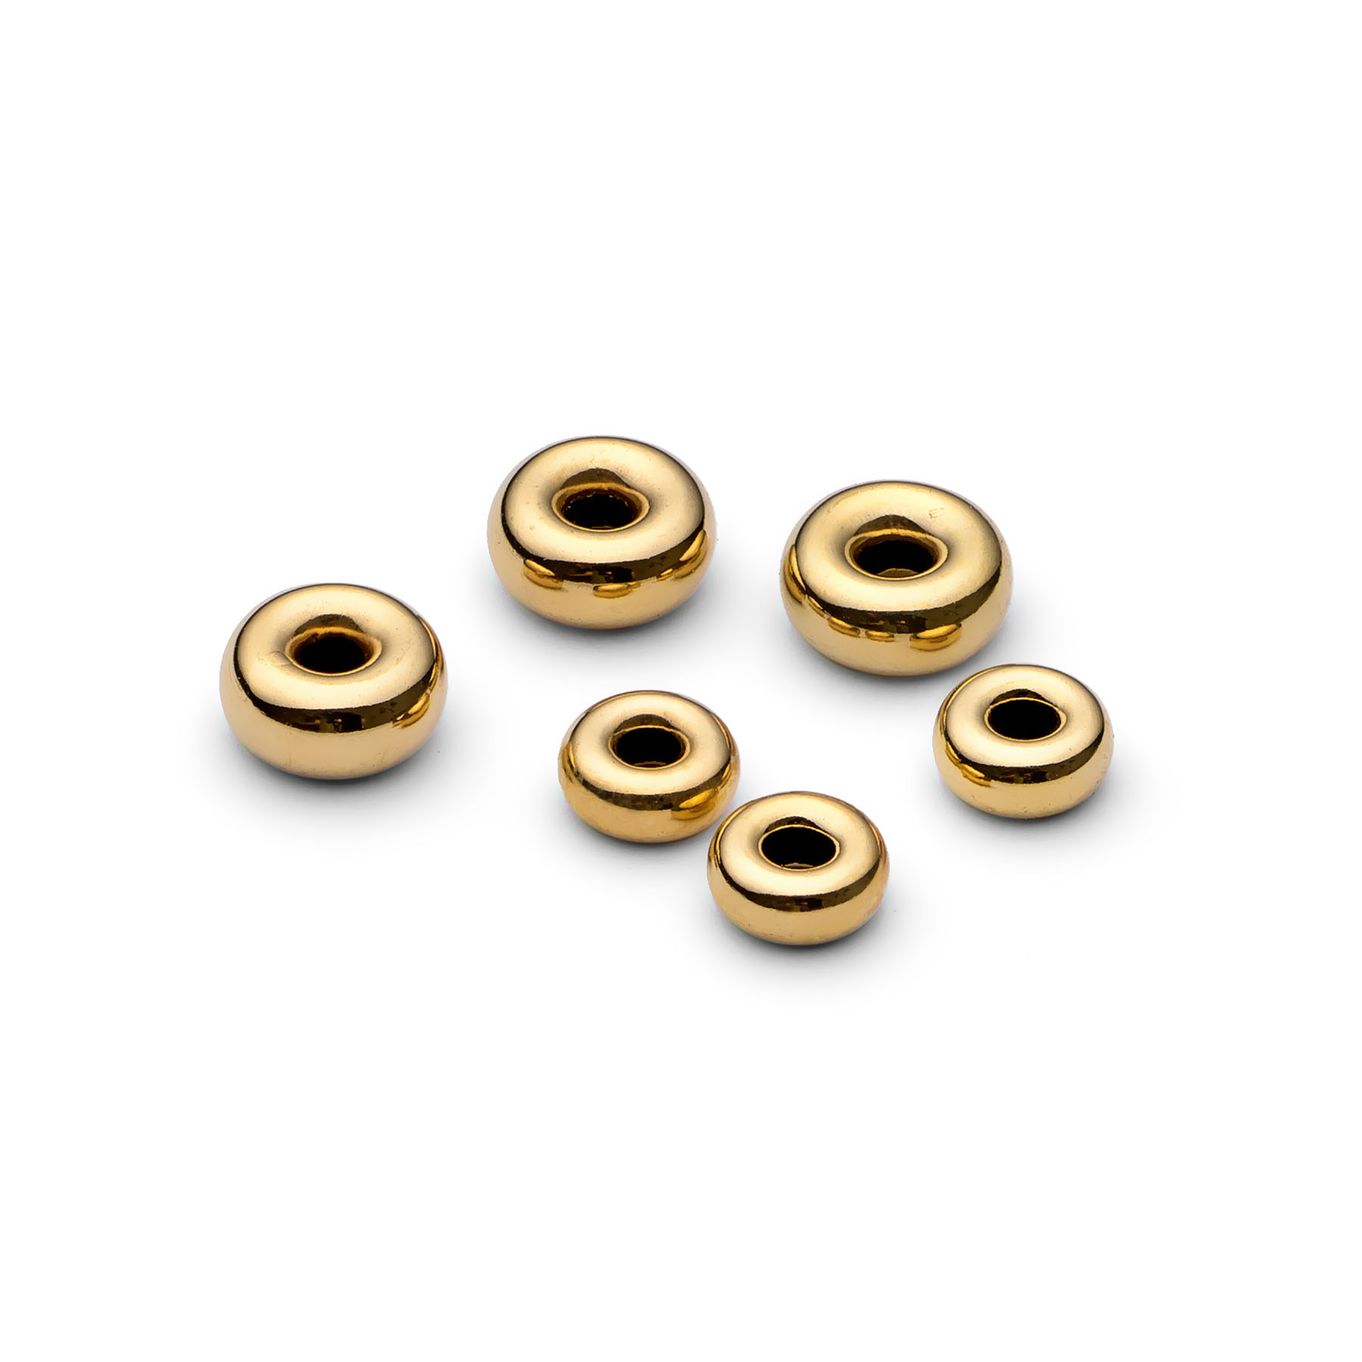 Gold Spacer Beads